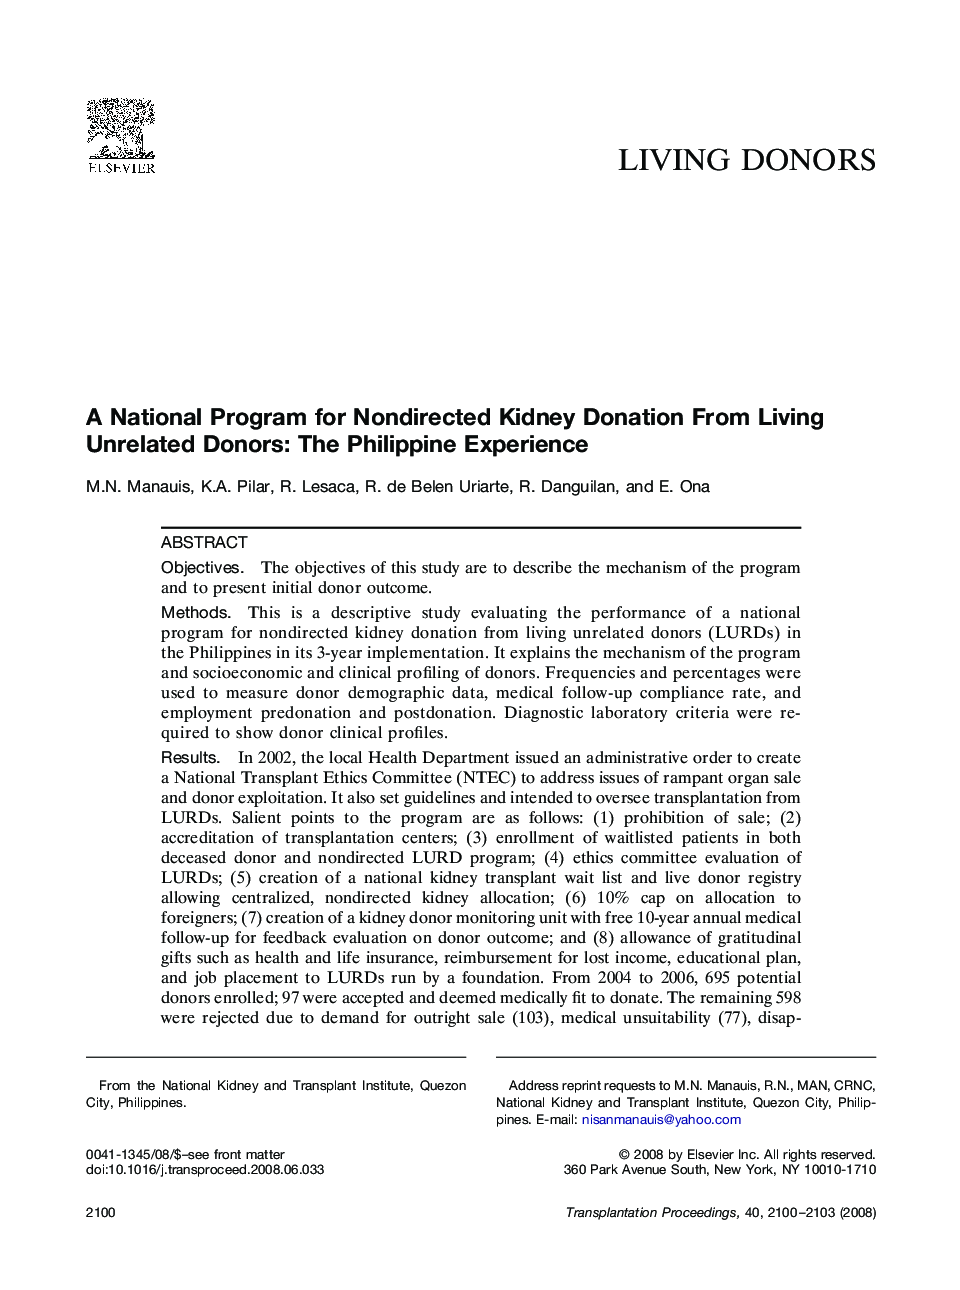 A National Program for Nondirected Kidney Donation From Living Unrelated Donors: The Philippine Experience